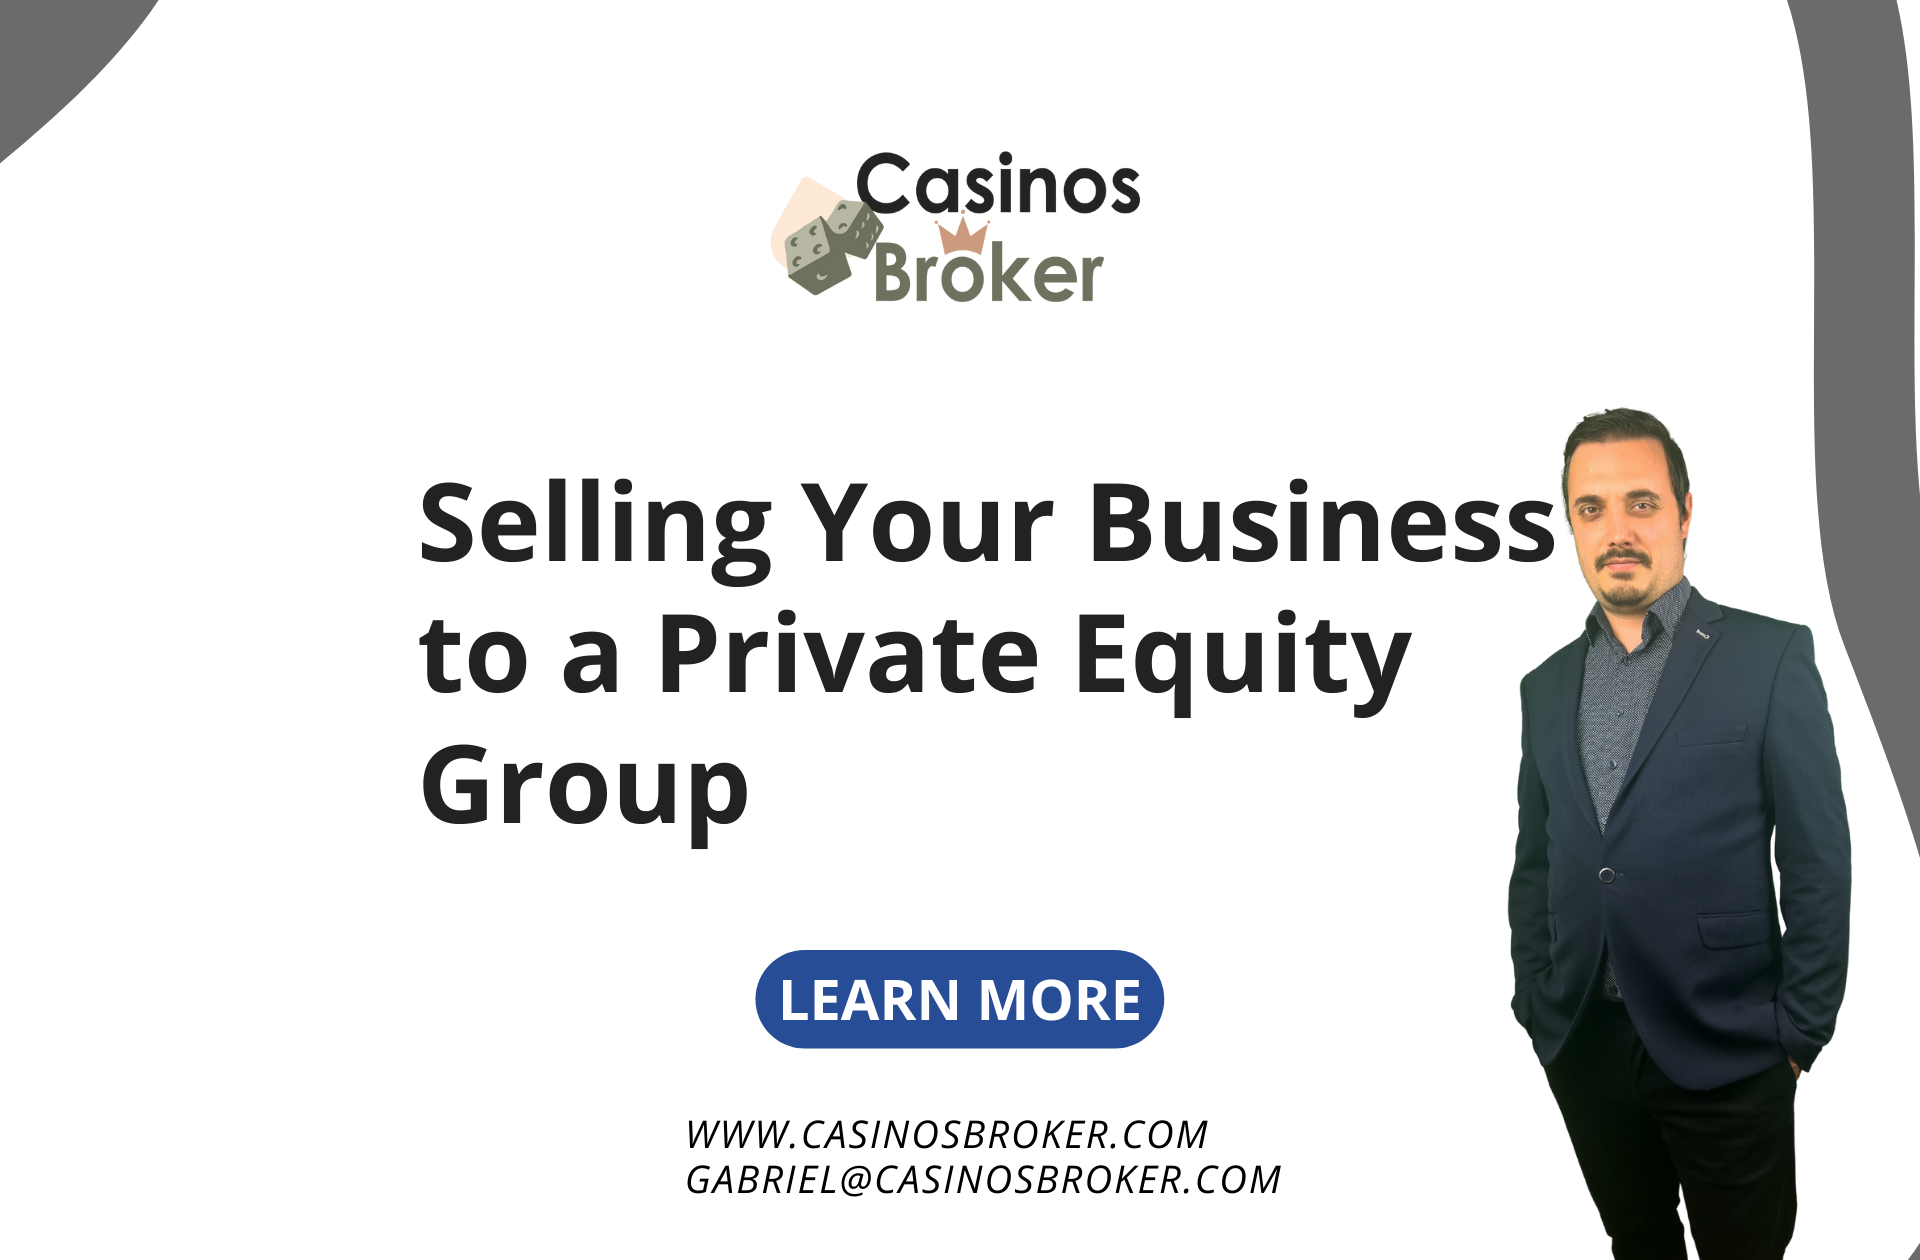 Selling Your Business to a Private Equity Group